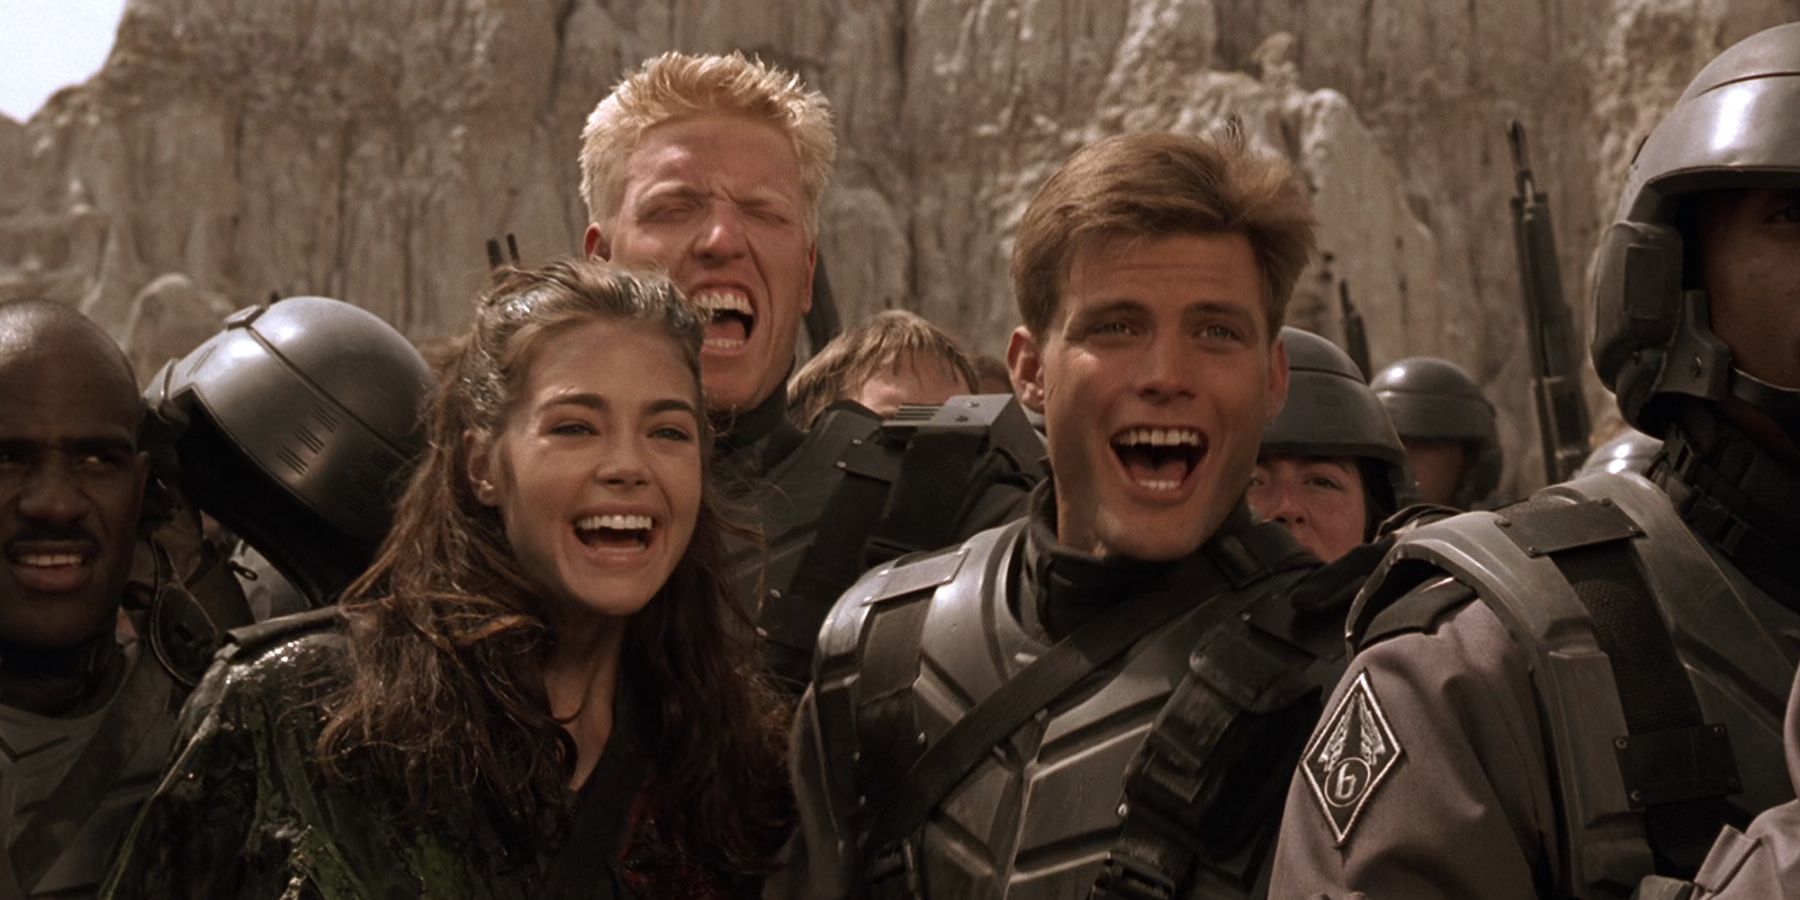 Rico, Carmen and Ace cheering in Starship Troopers